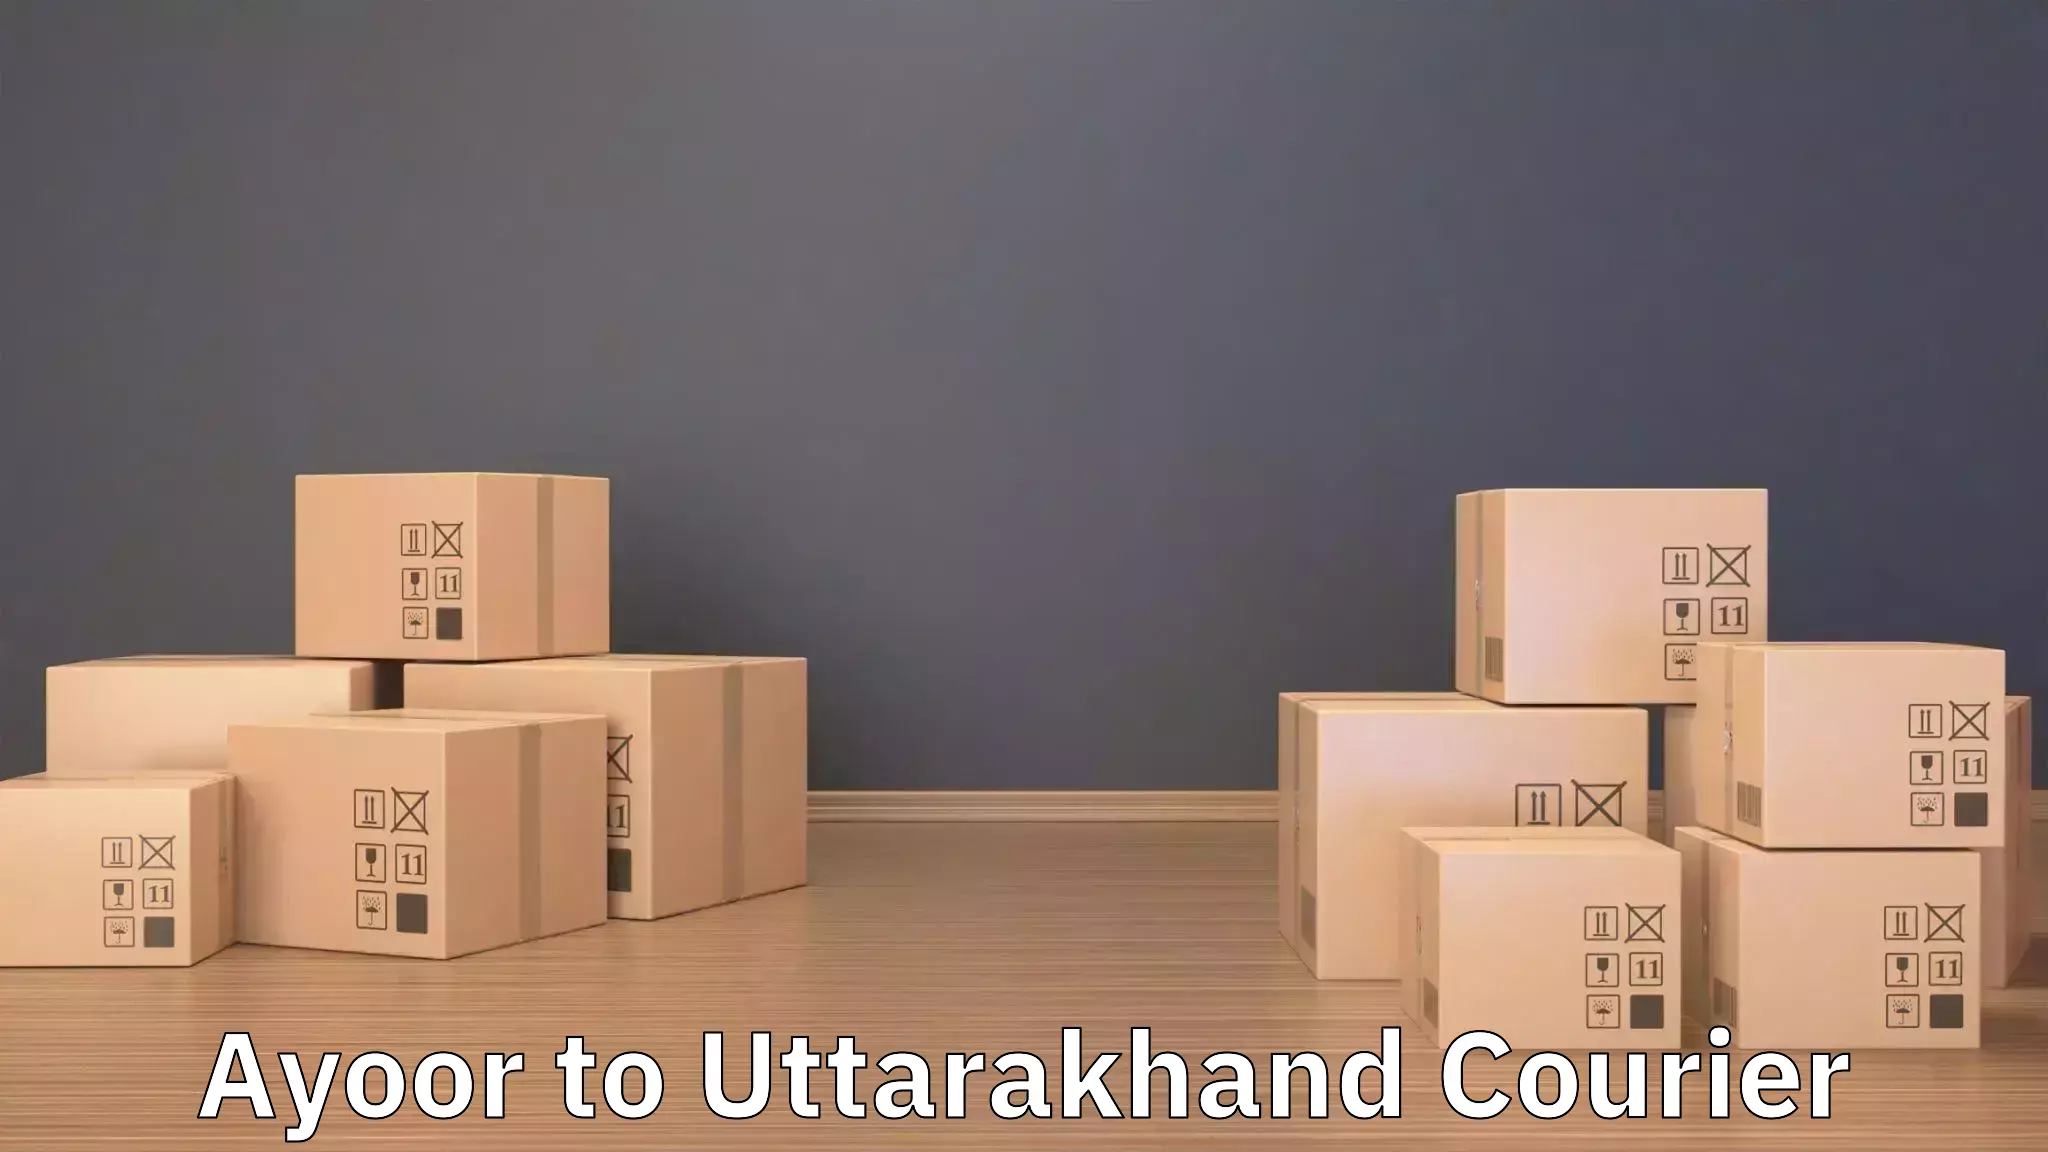 Cost-effective moving options Ayoor to Haridwar